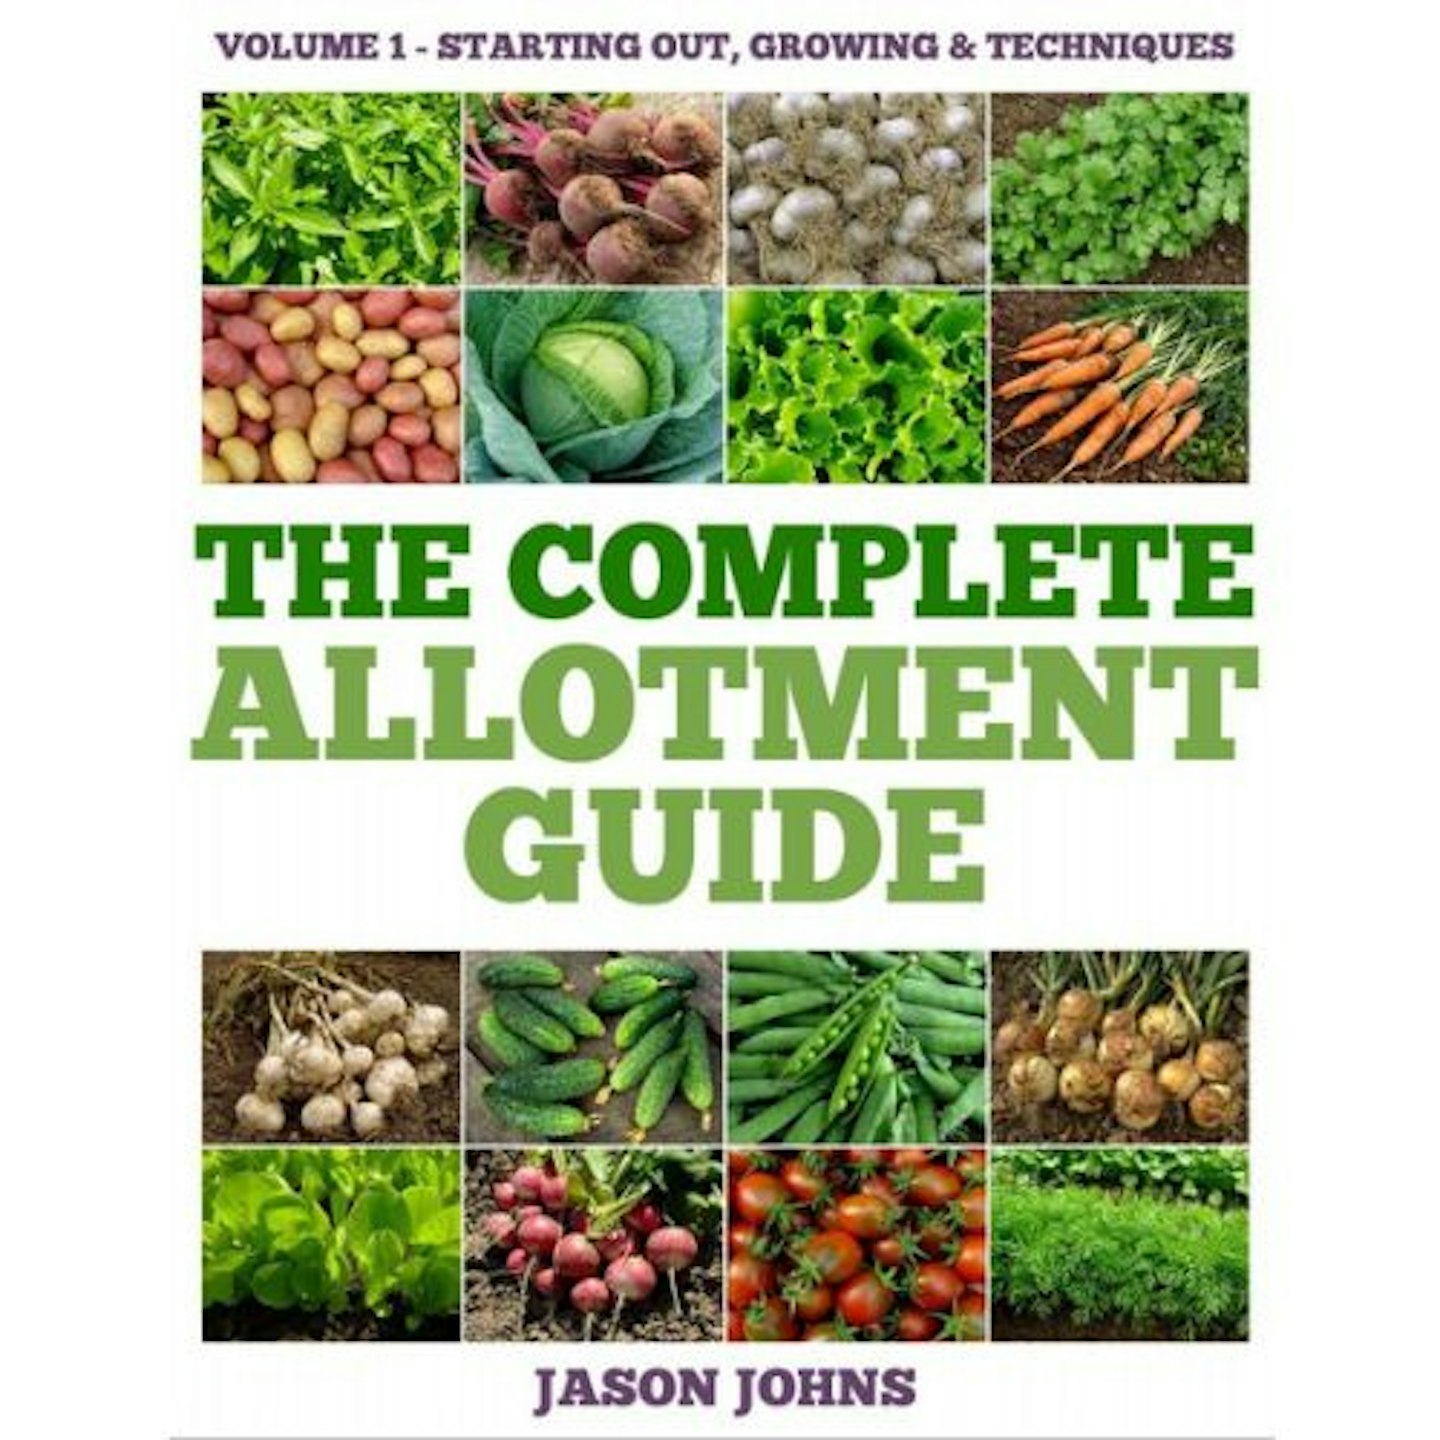 The Complete Allotment Guide